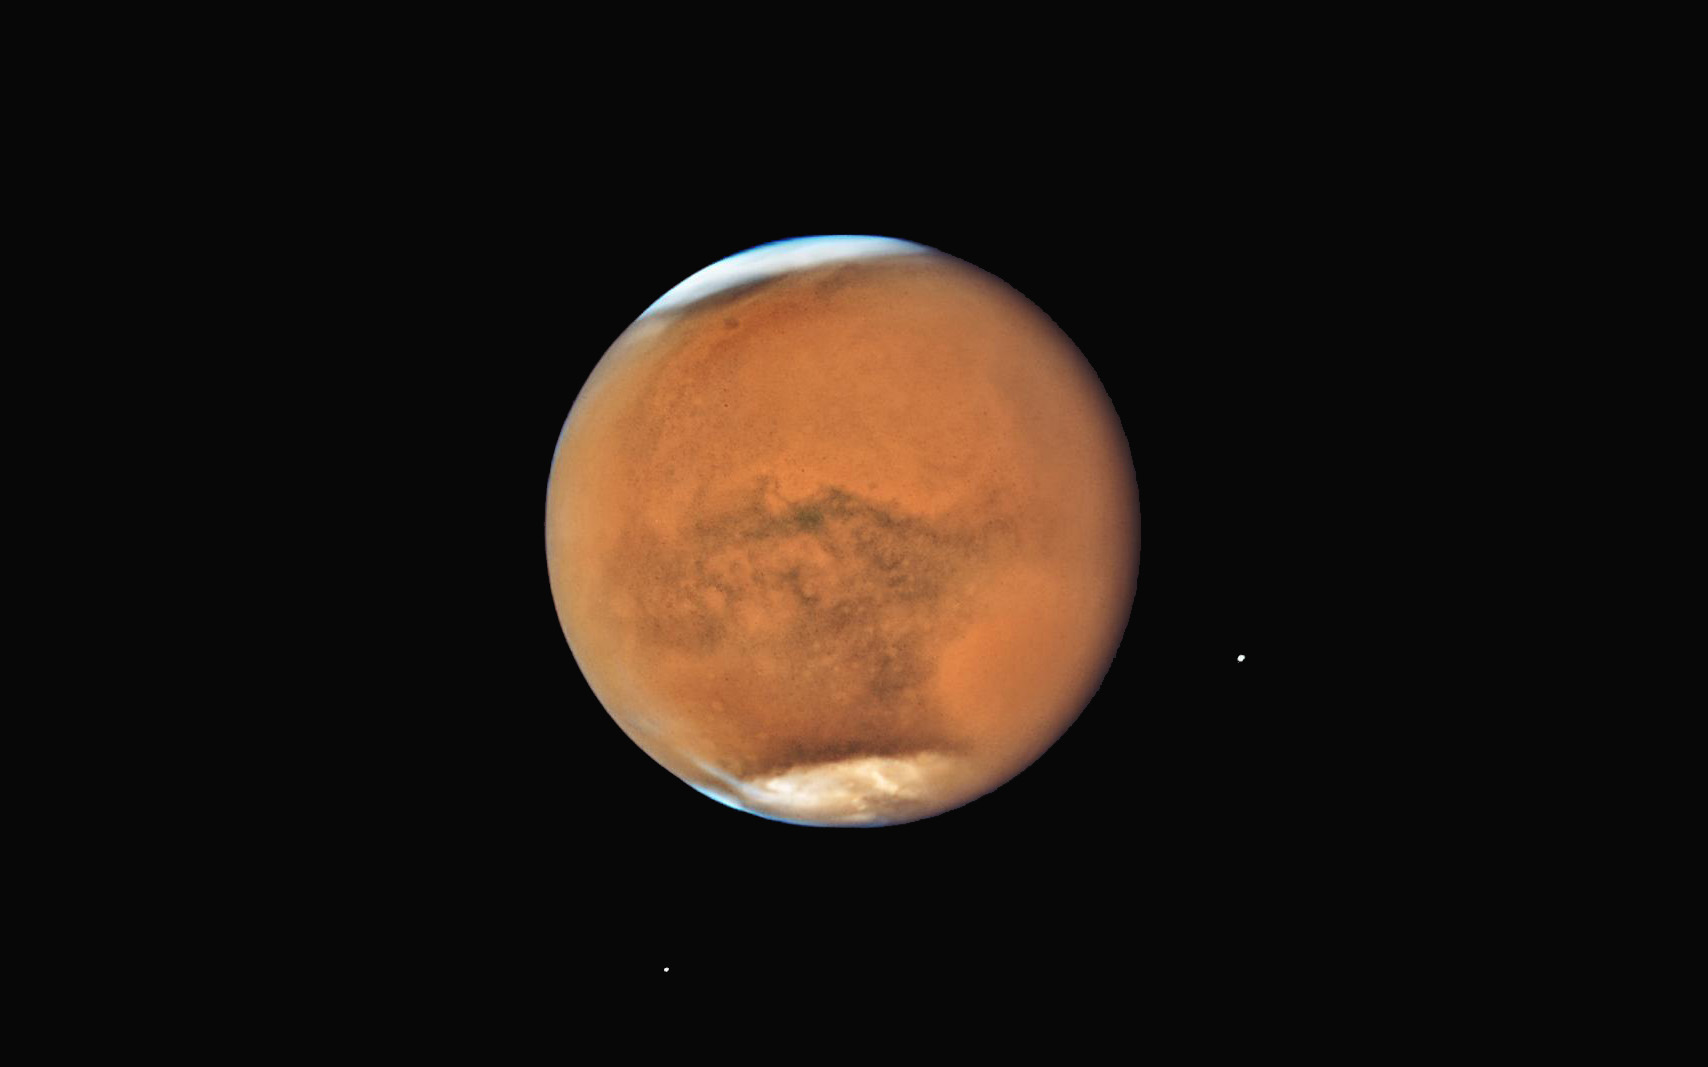 The Hubble Space Telescope captured this crystal-clear view of Mars and its two moons Phobos and Deimos in mid-July, when a massive dust storm was still raging across the planet's surface. Today, the Red Planet will reach opposition, when it is on the opposite side of Earth as the sun. Mars will make its closest approach to Earth since 2003 on Tuesday (July 31).